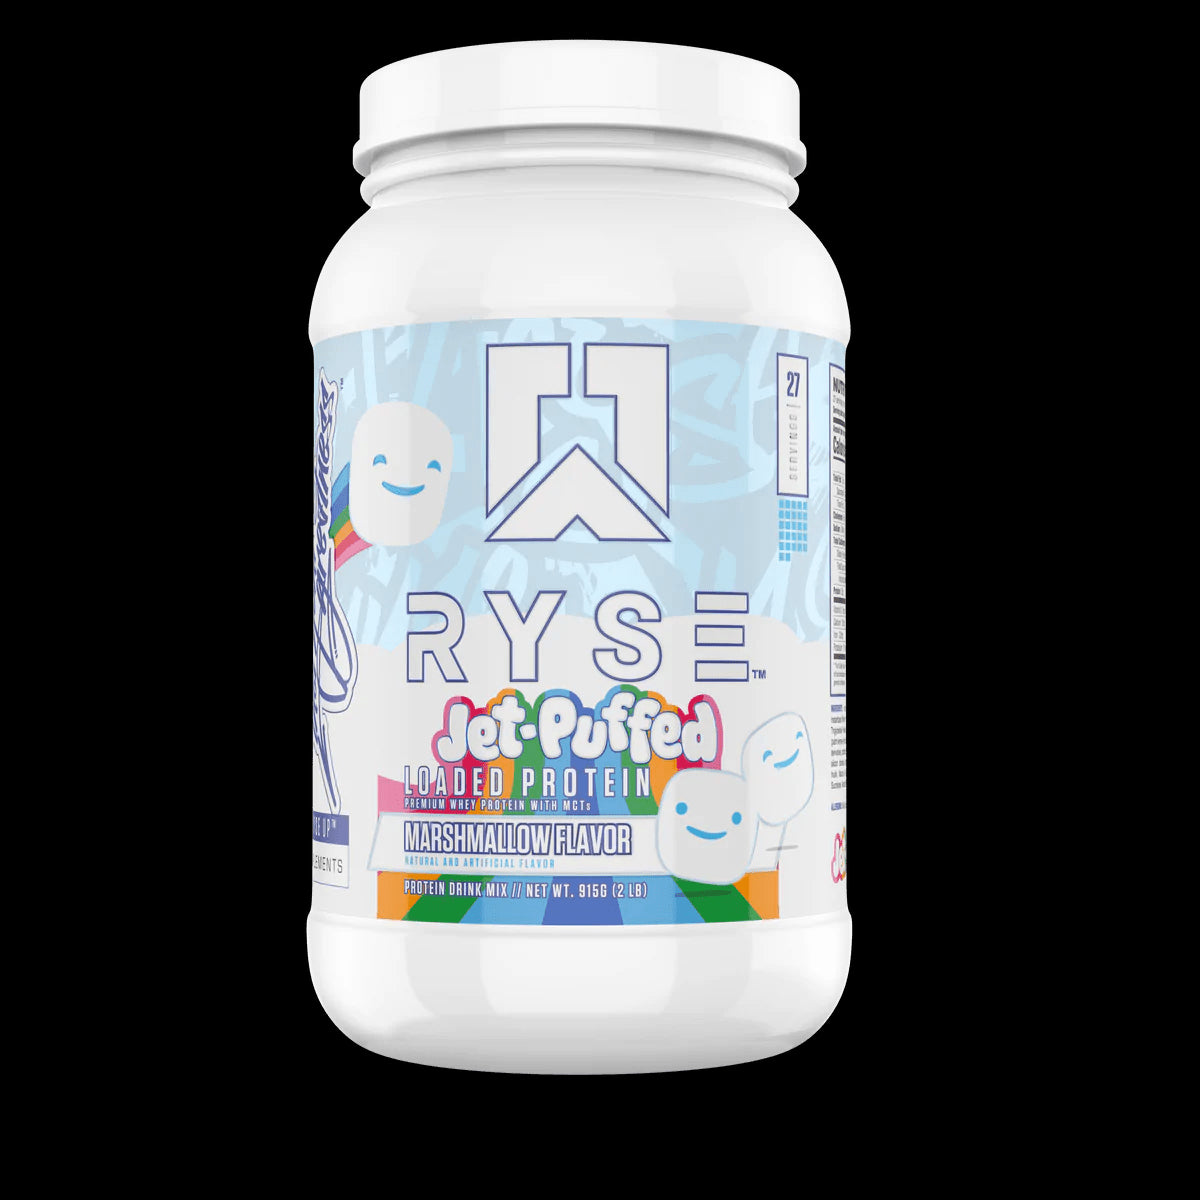 RYSE Jet- Puffed Loaded Protein - Bemoxie Supplements